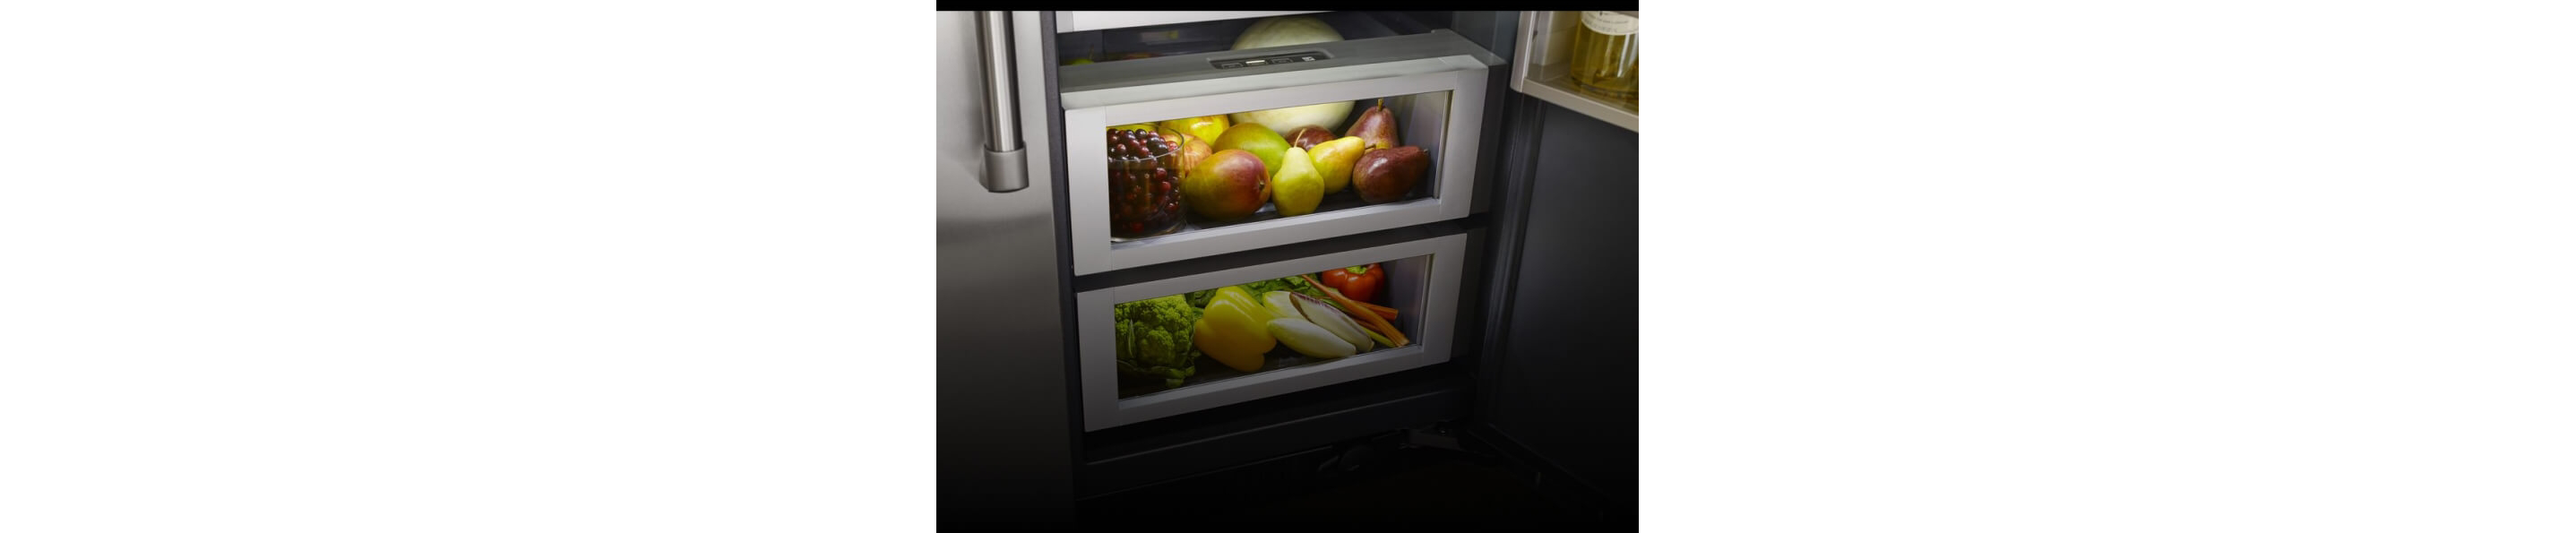 Climate-controlled produce drawers inside a JennAir® built-in refrigerator.